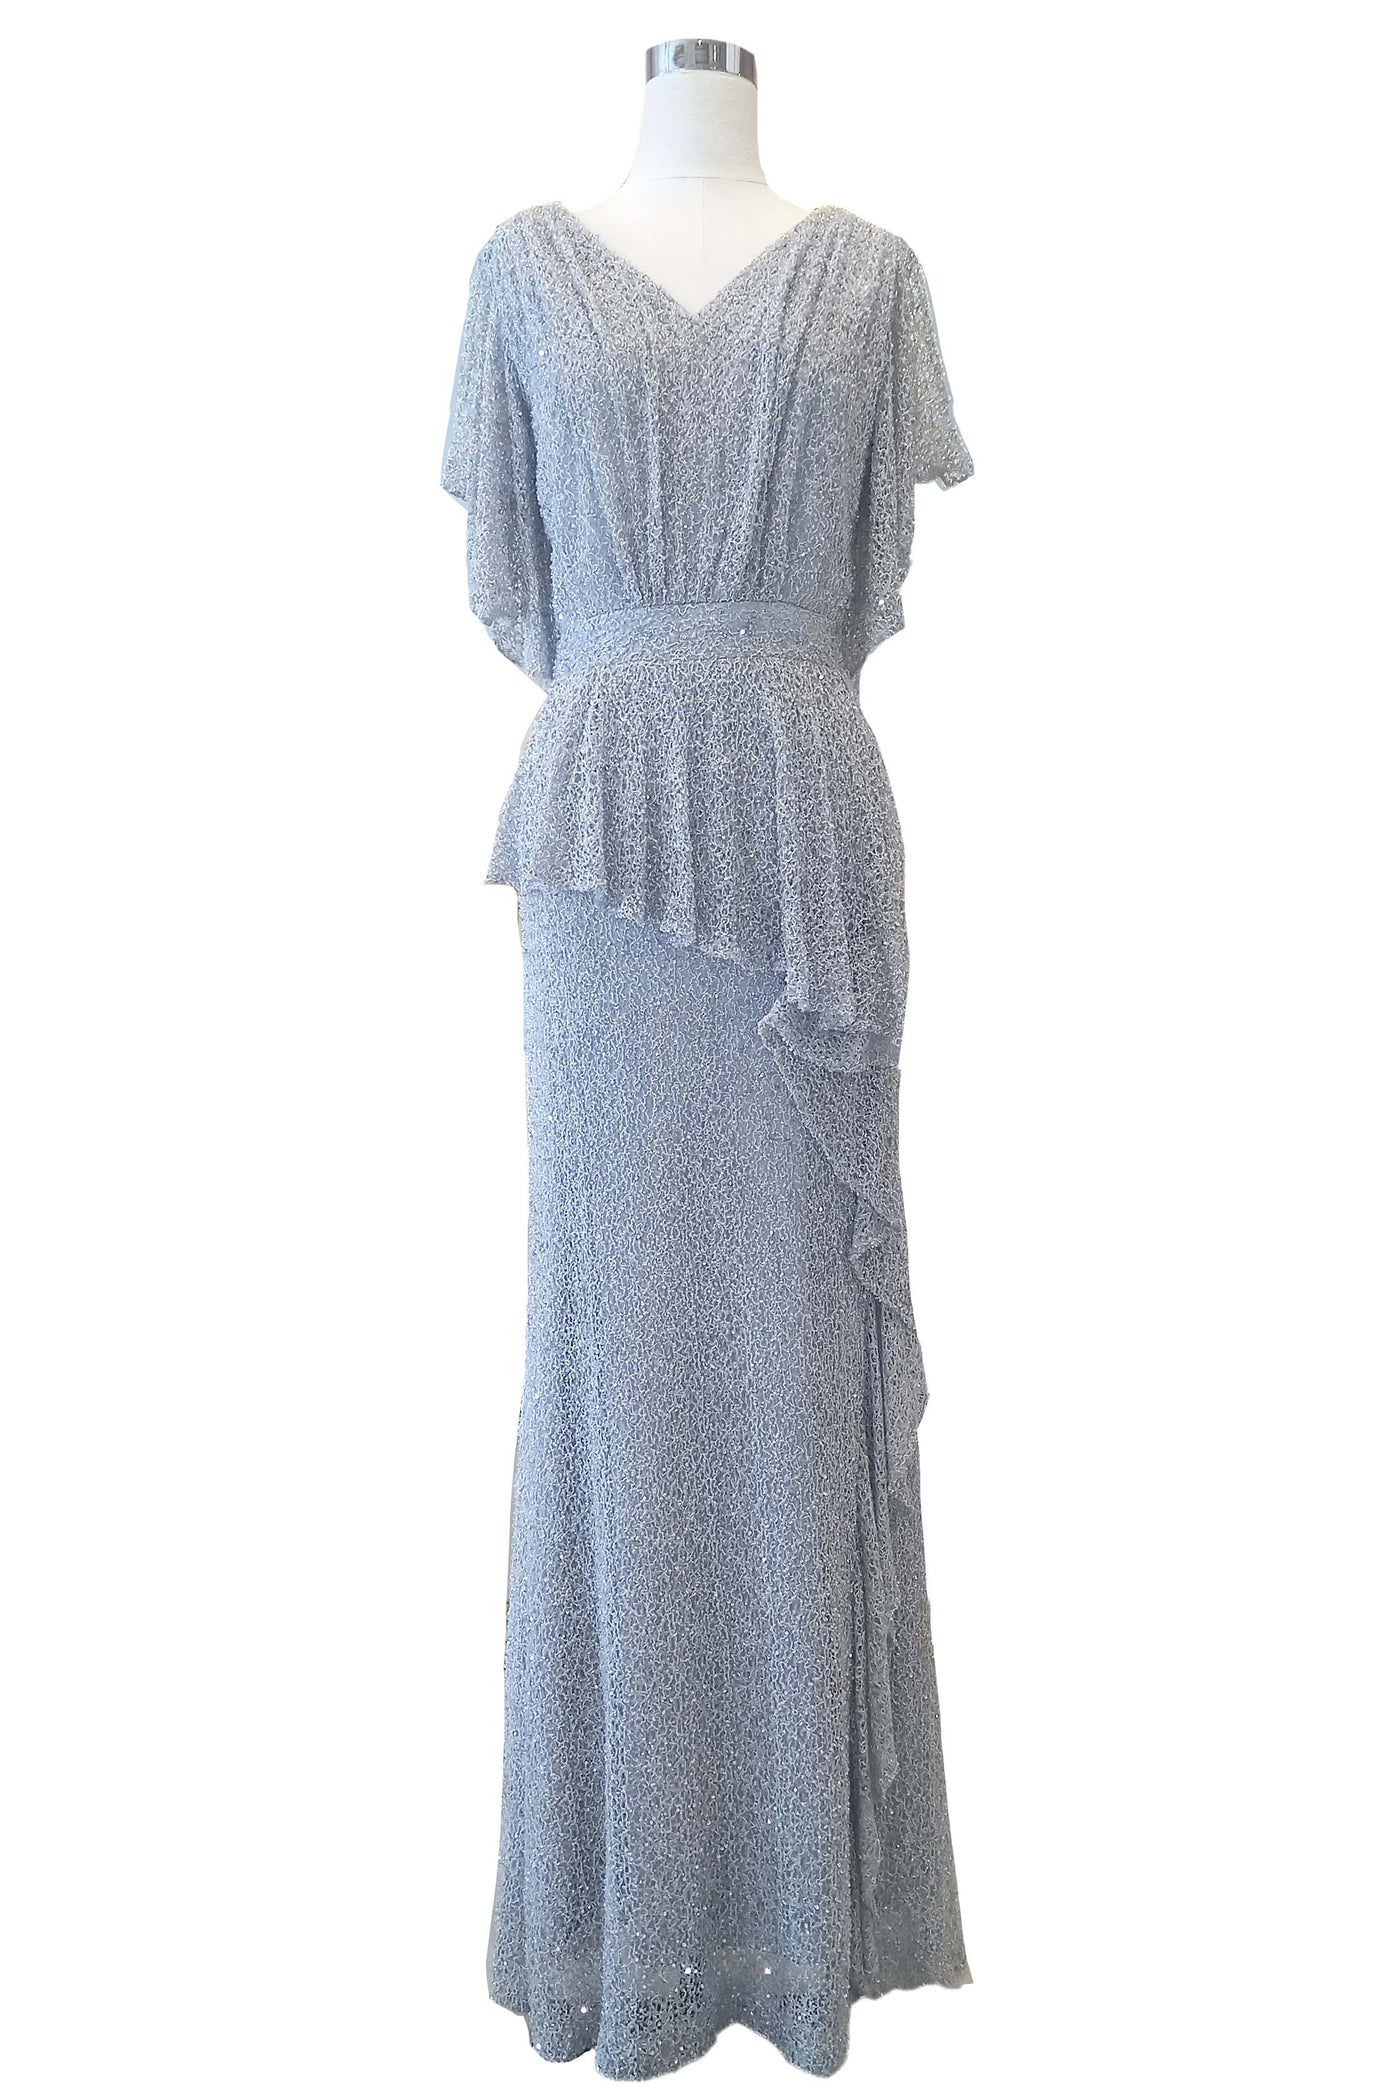 Buy : Private Label - Silver Ruffles Gown